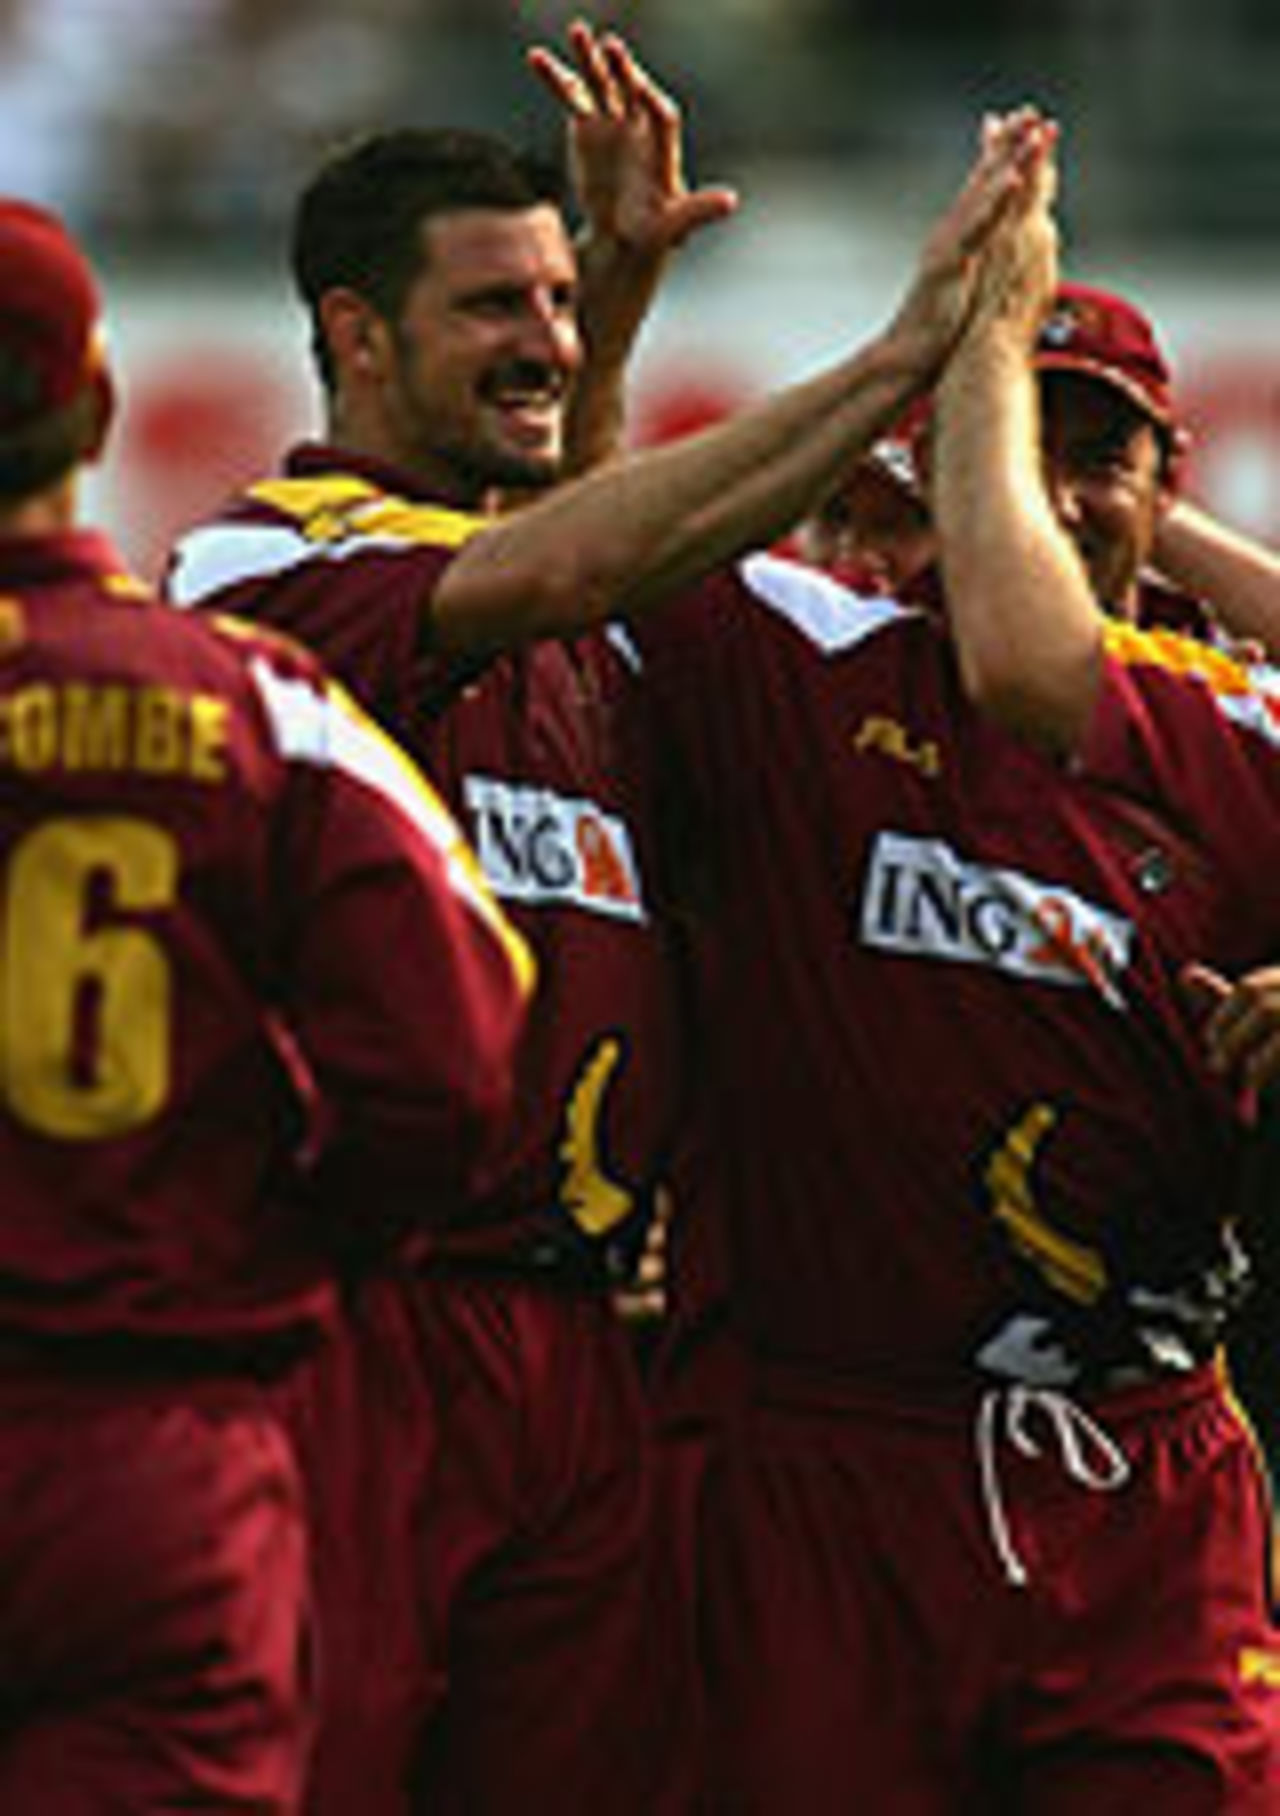 Michael Kasprowicz celebrates another wicket against the Warriors, Queensland v WA, February 11, 2005